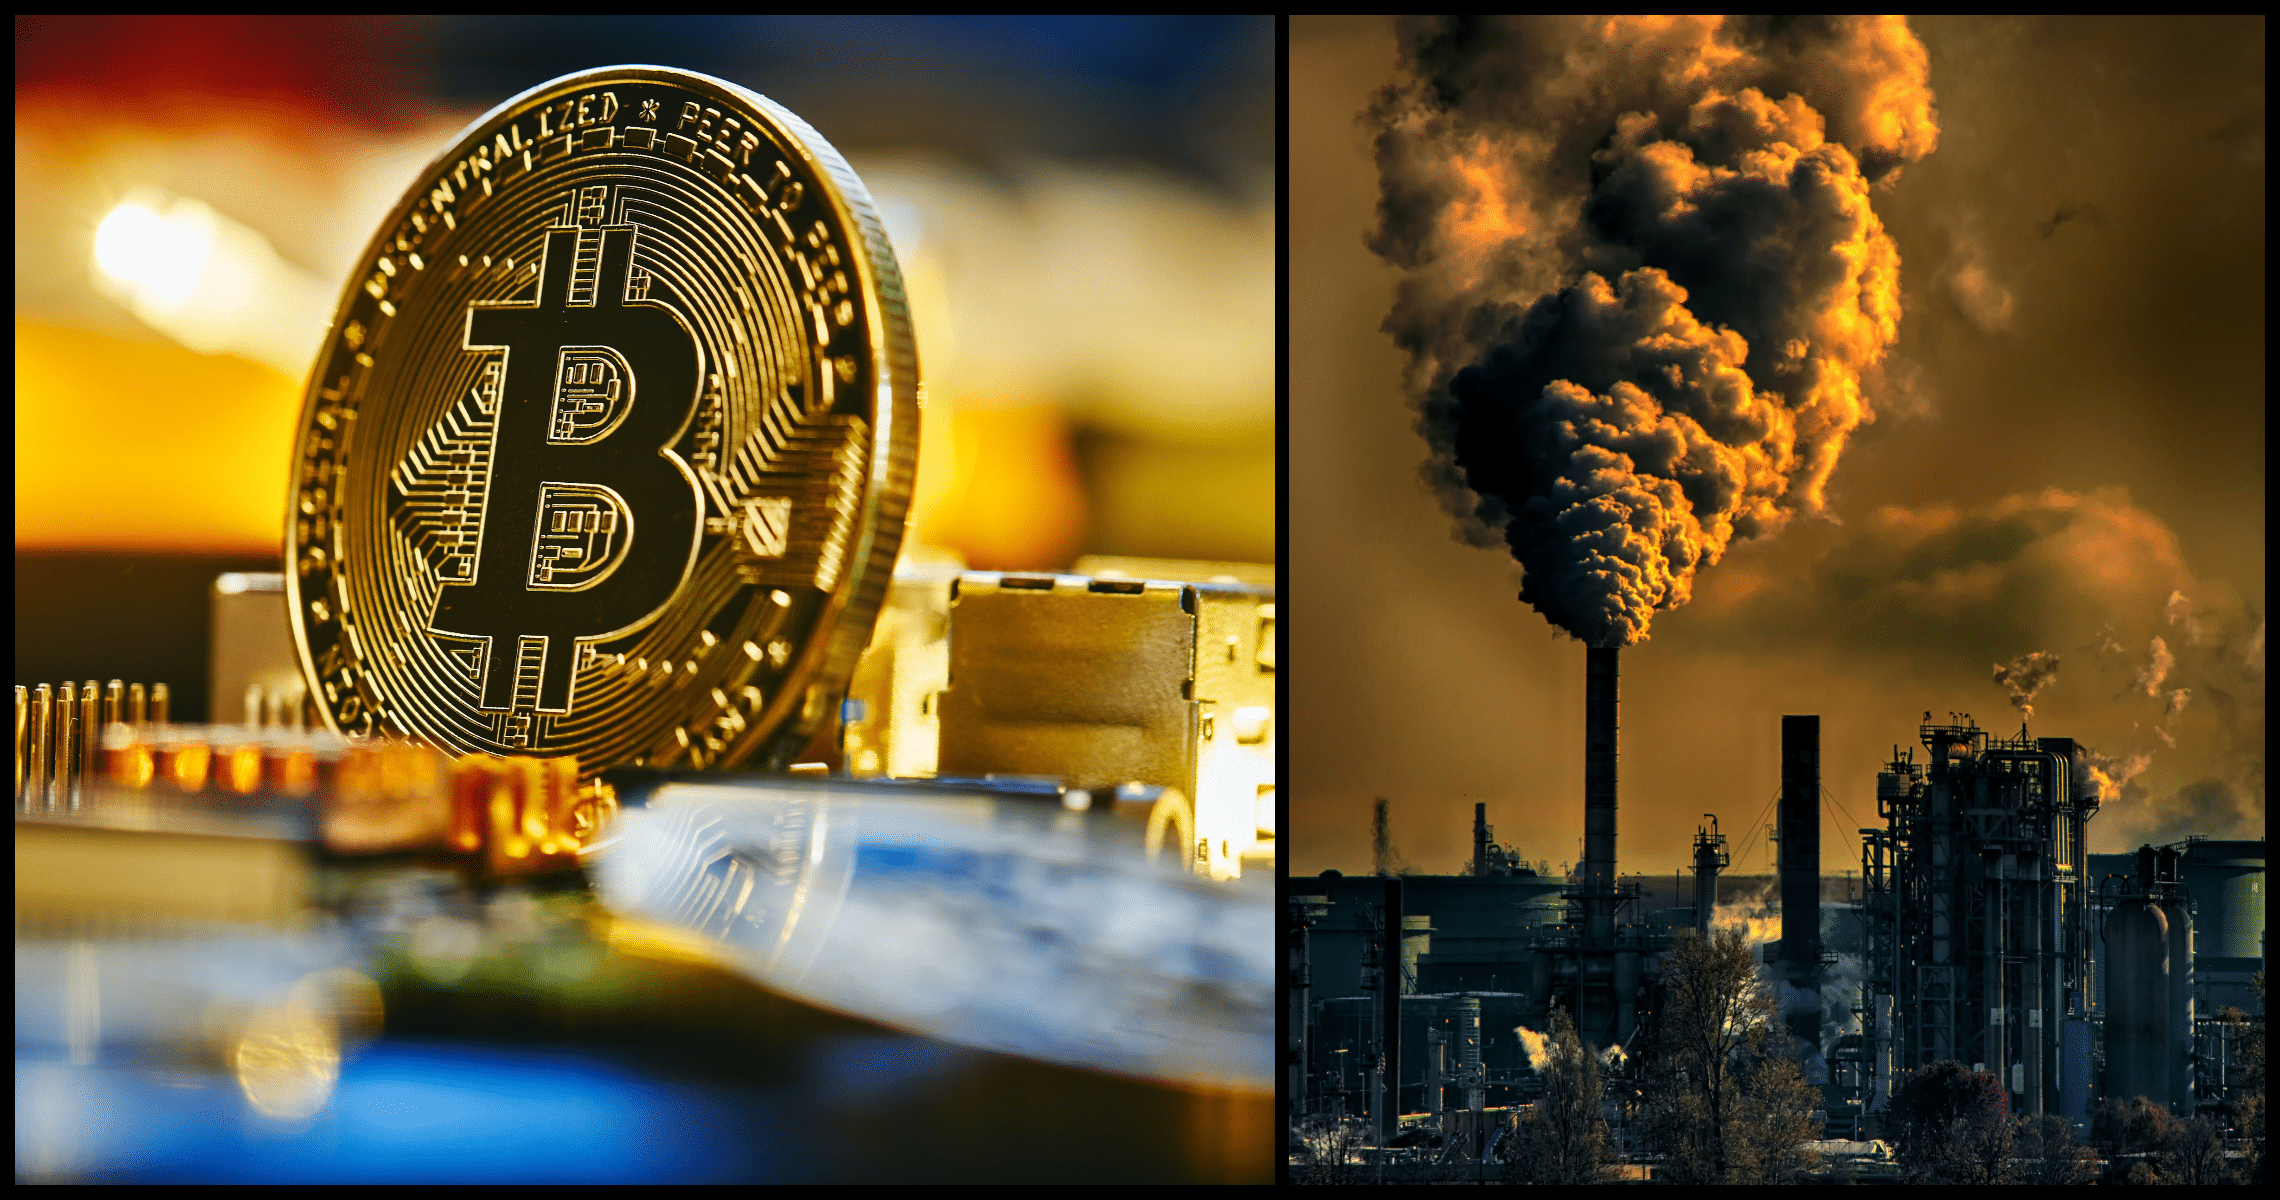 America's largest oil producer is already burning natural gas and extracting bitcoin